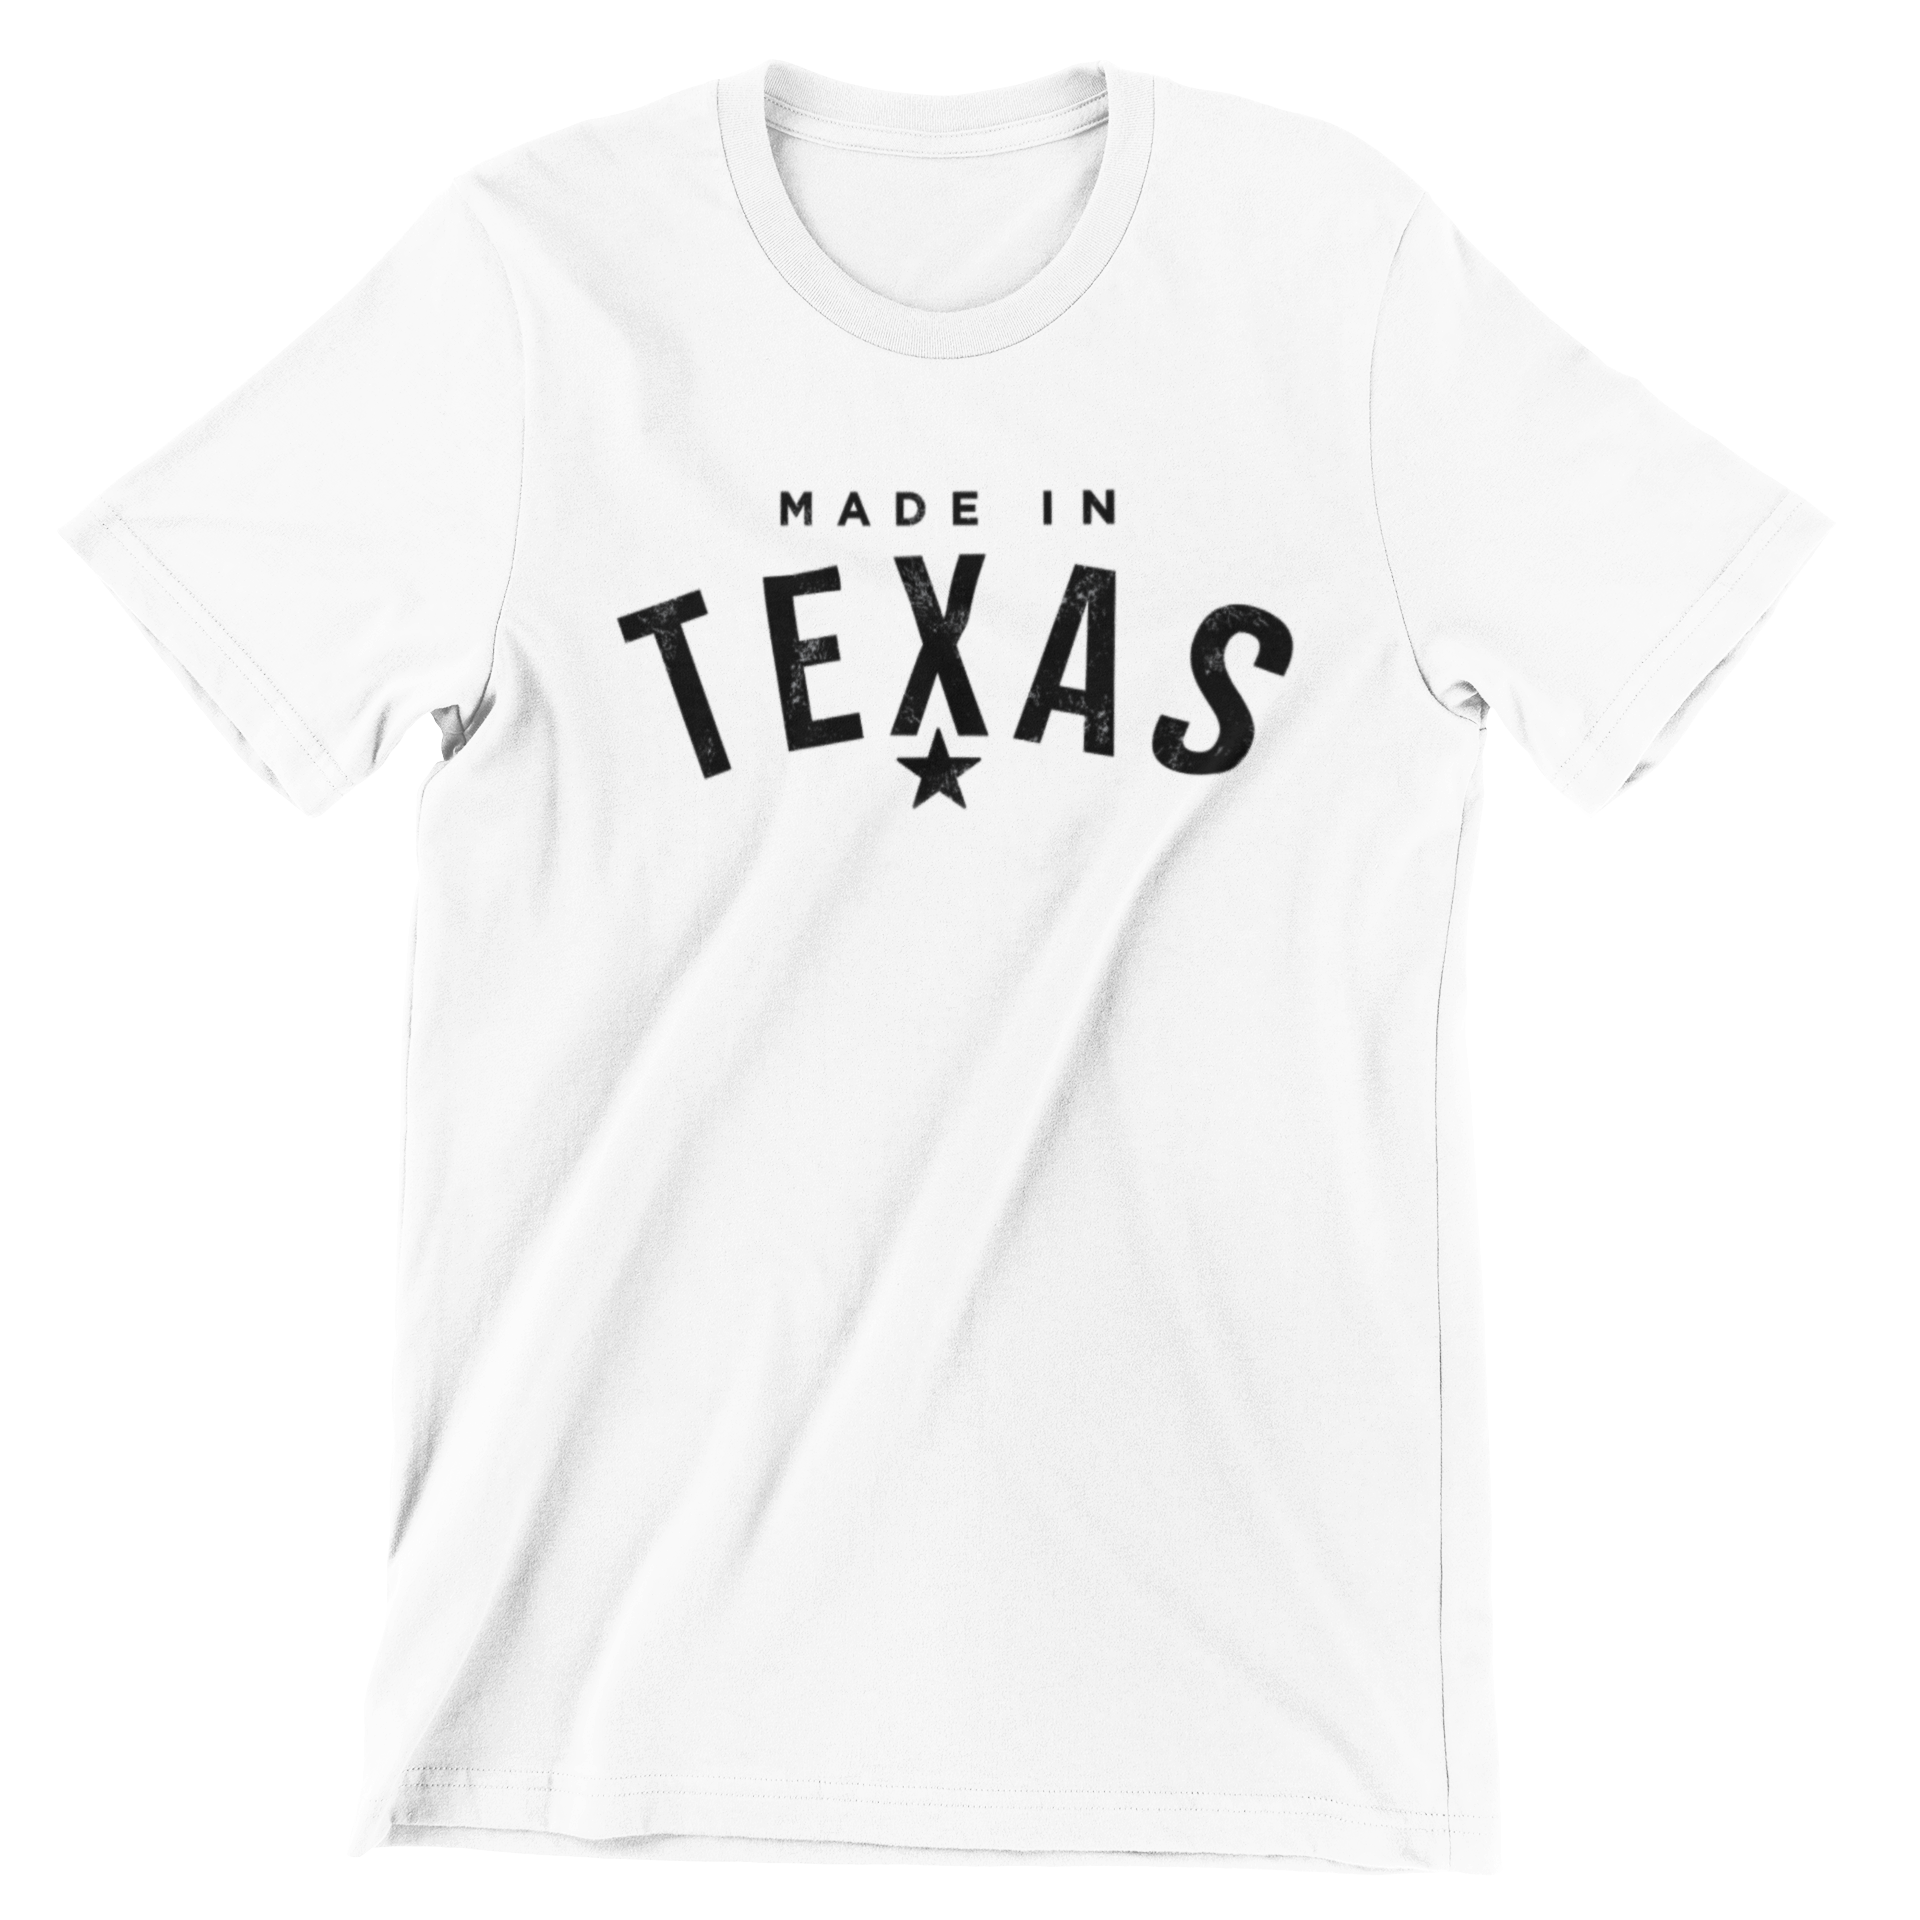 Made in Texas Co. T-Shirt